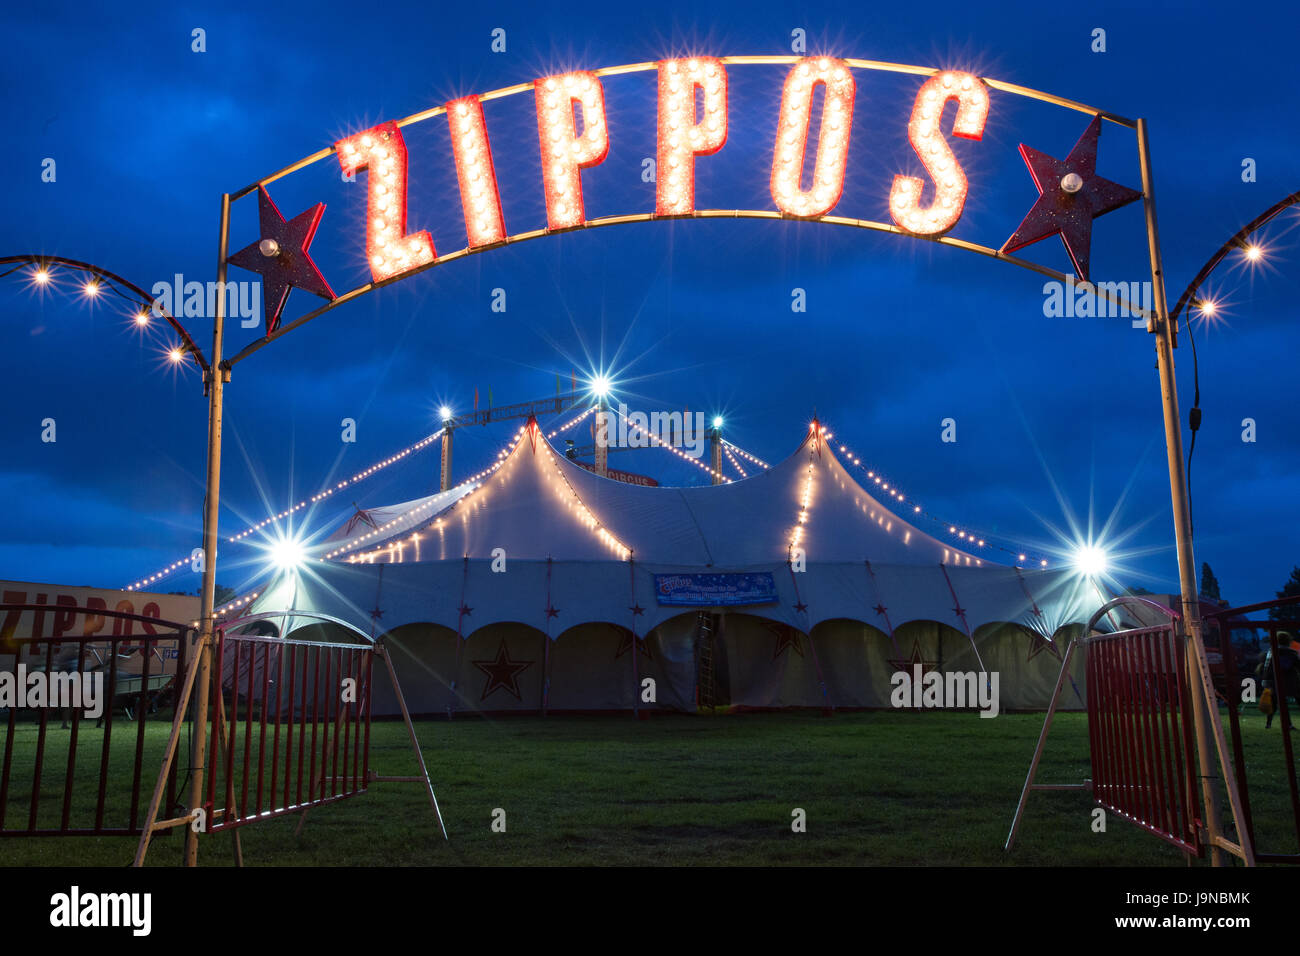 Zippo's Circus Tent Lights and Sign At Night Stock Photo - Alamy